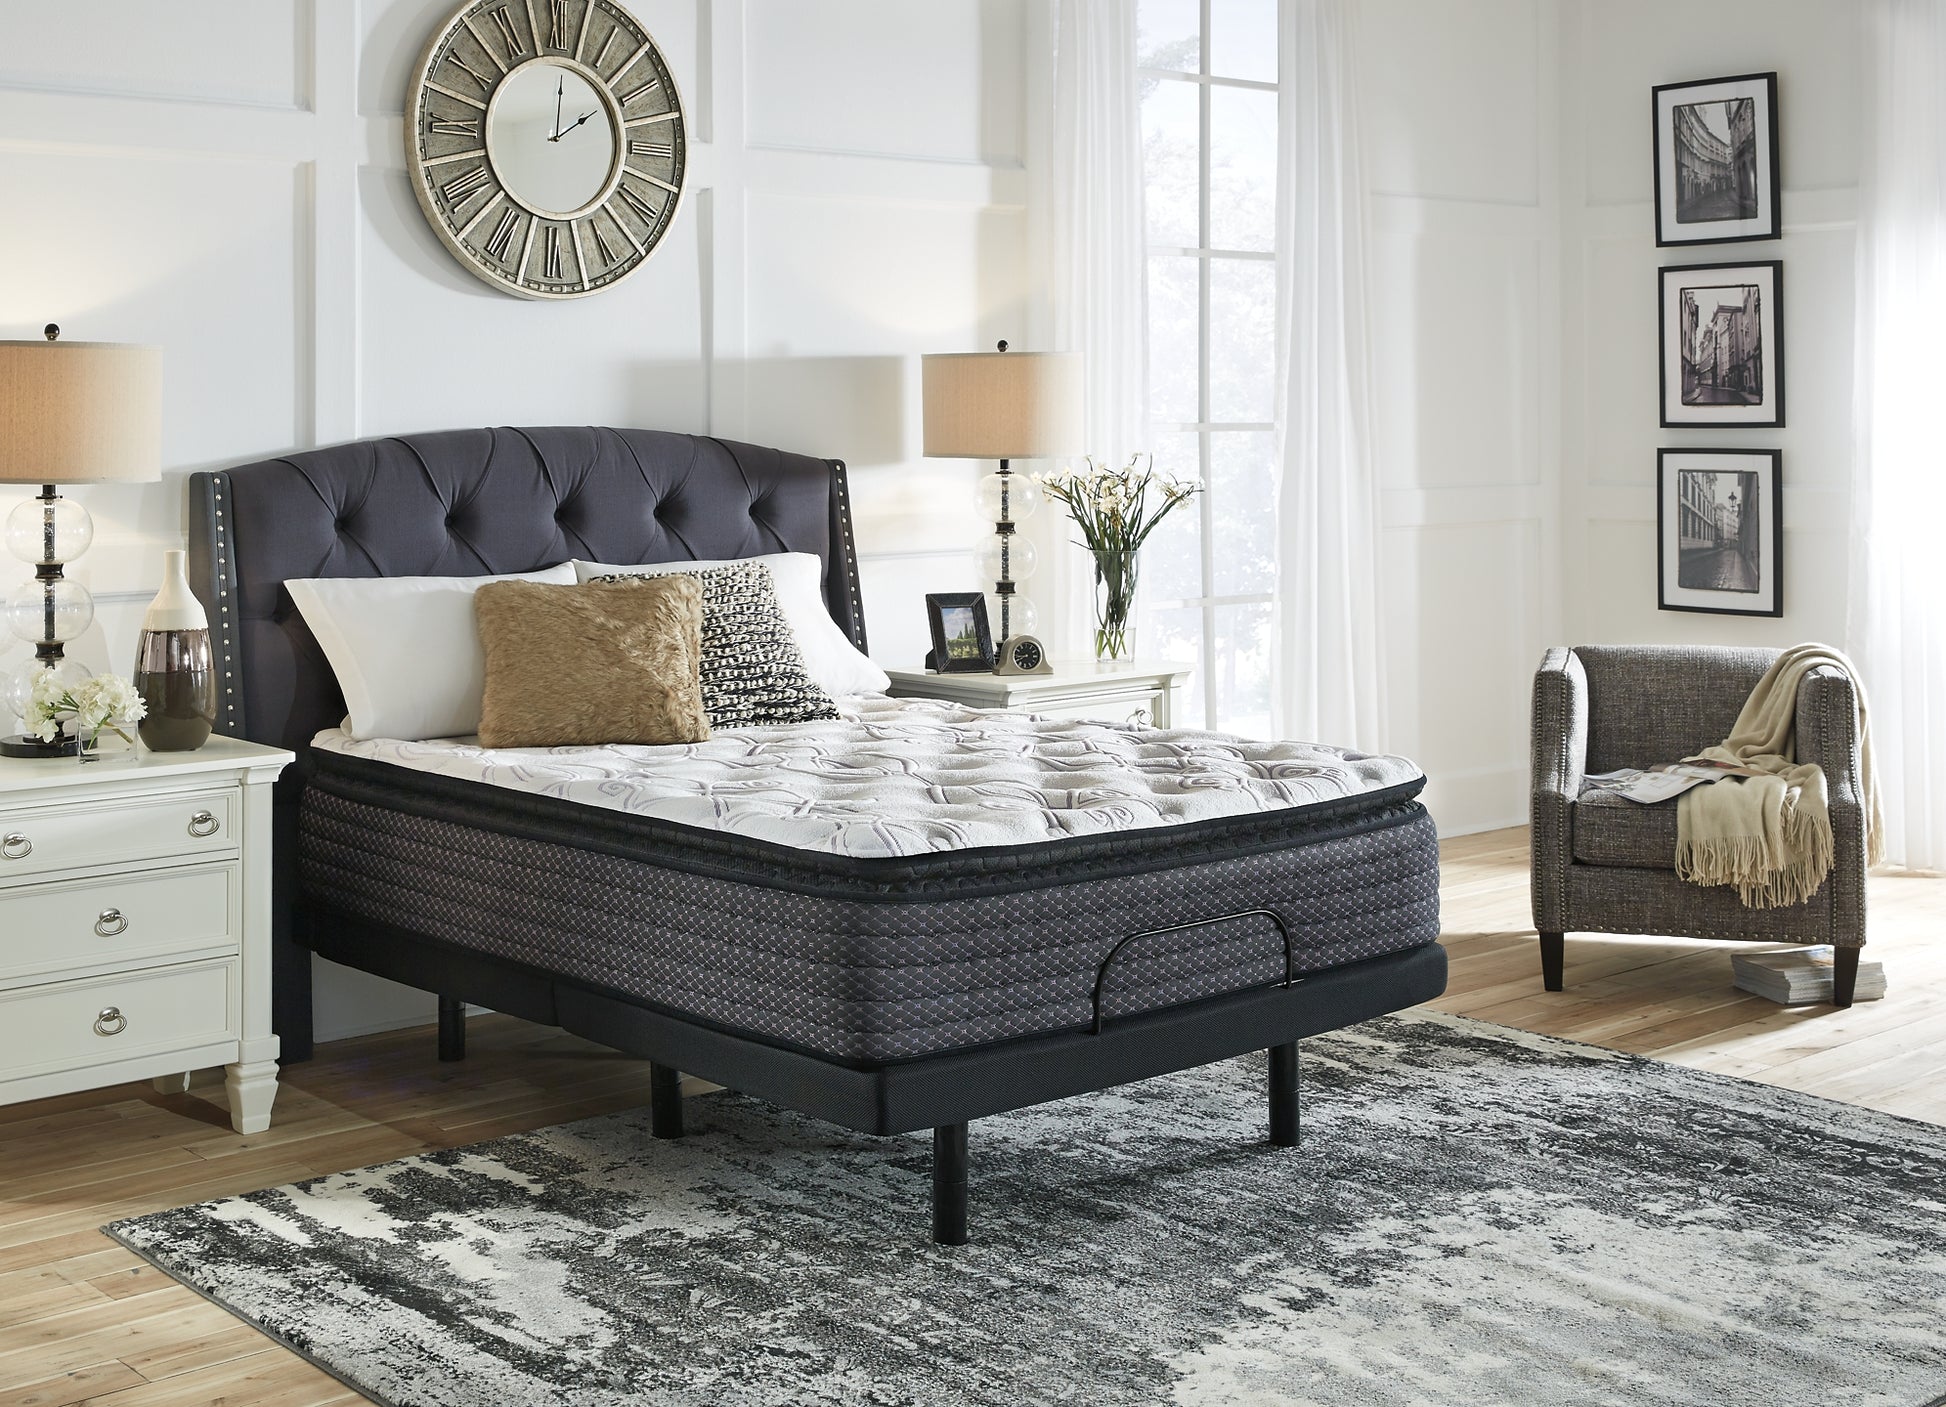 Limited Edition Pillowtop Mattress with Adjustable Base Sierra Sleep® by Ashley